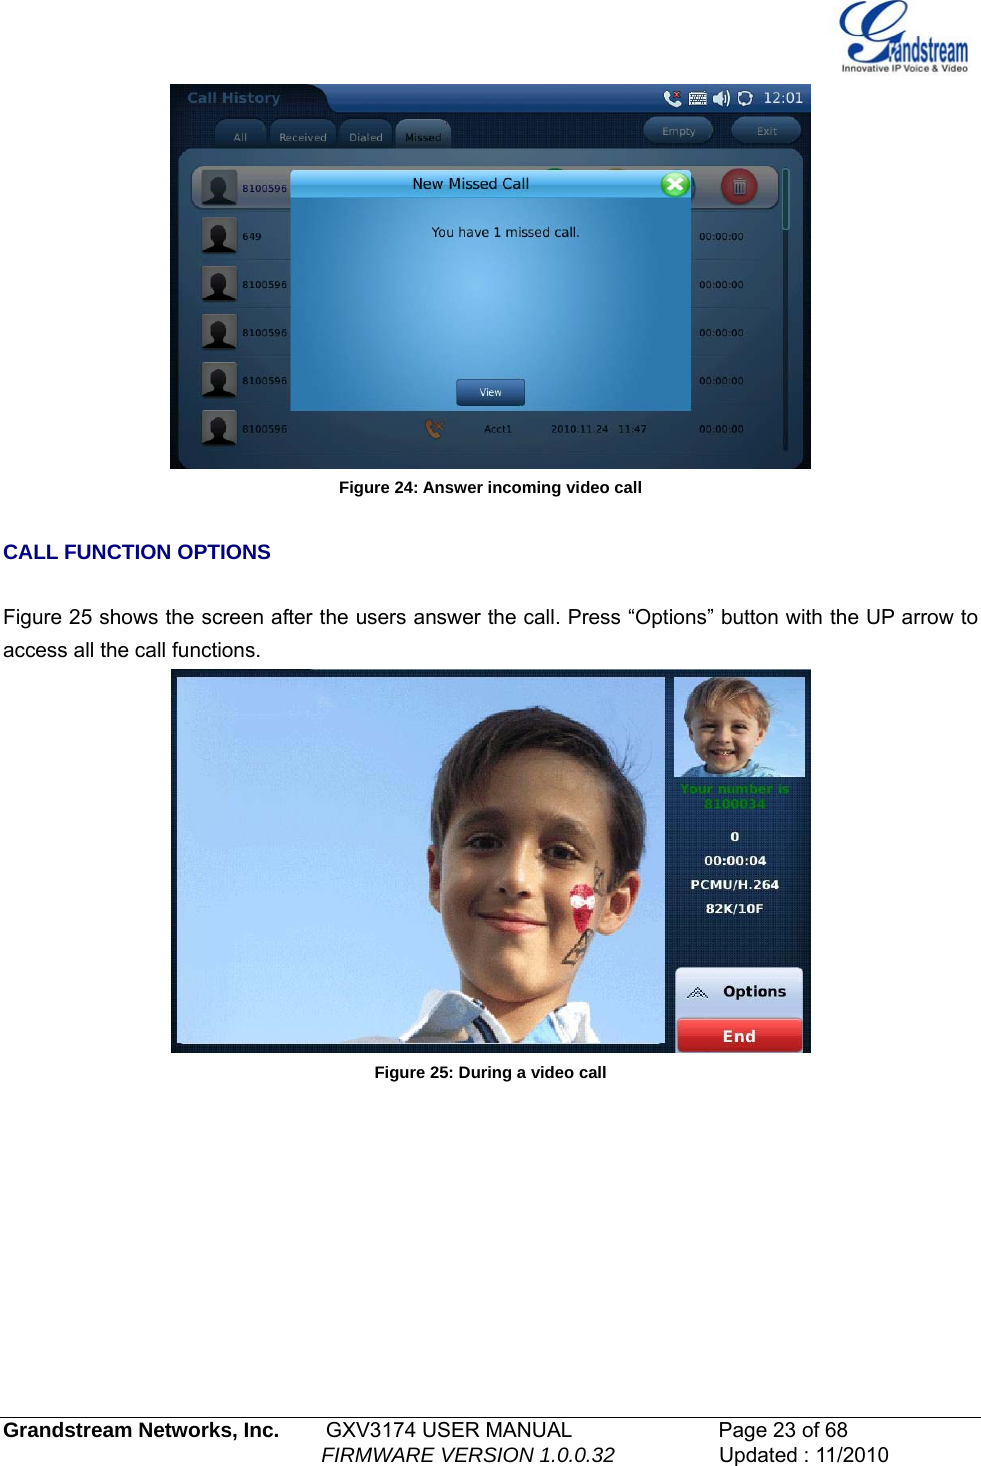    Figure 24: Answer incoming video call  CALL FUNCTION OPTIONS  Figure 25 shows the screen after the users answer the call. Press “Options” button with the UP arrow to access all the call functions.  Figure 25: During a video call    Grandstream Networks, Inc.        GXV3174 USER MANUAL                      Page 23 of 68                                                        FIRMWARE VERSION 1.0.0.32                  Updated : 11/2010  